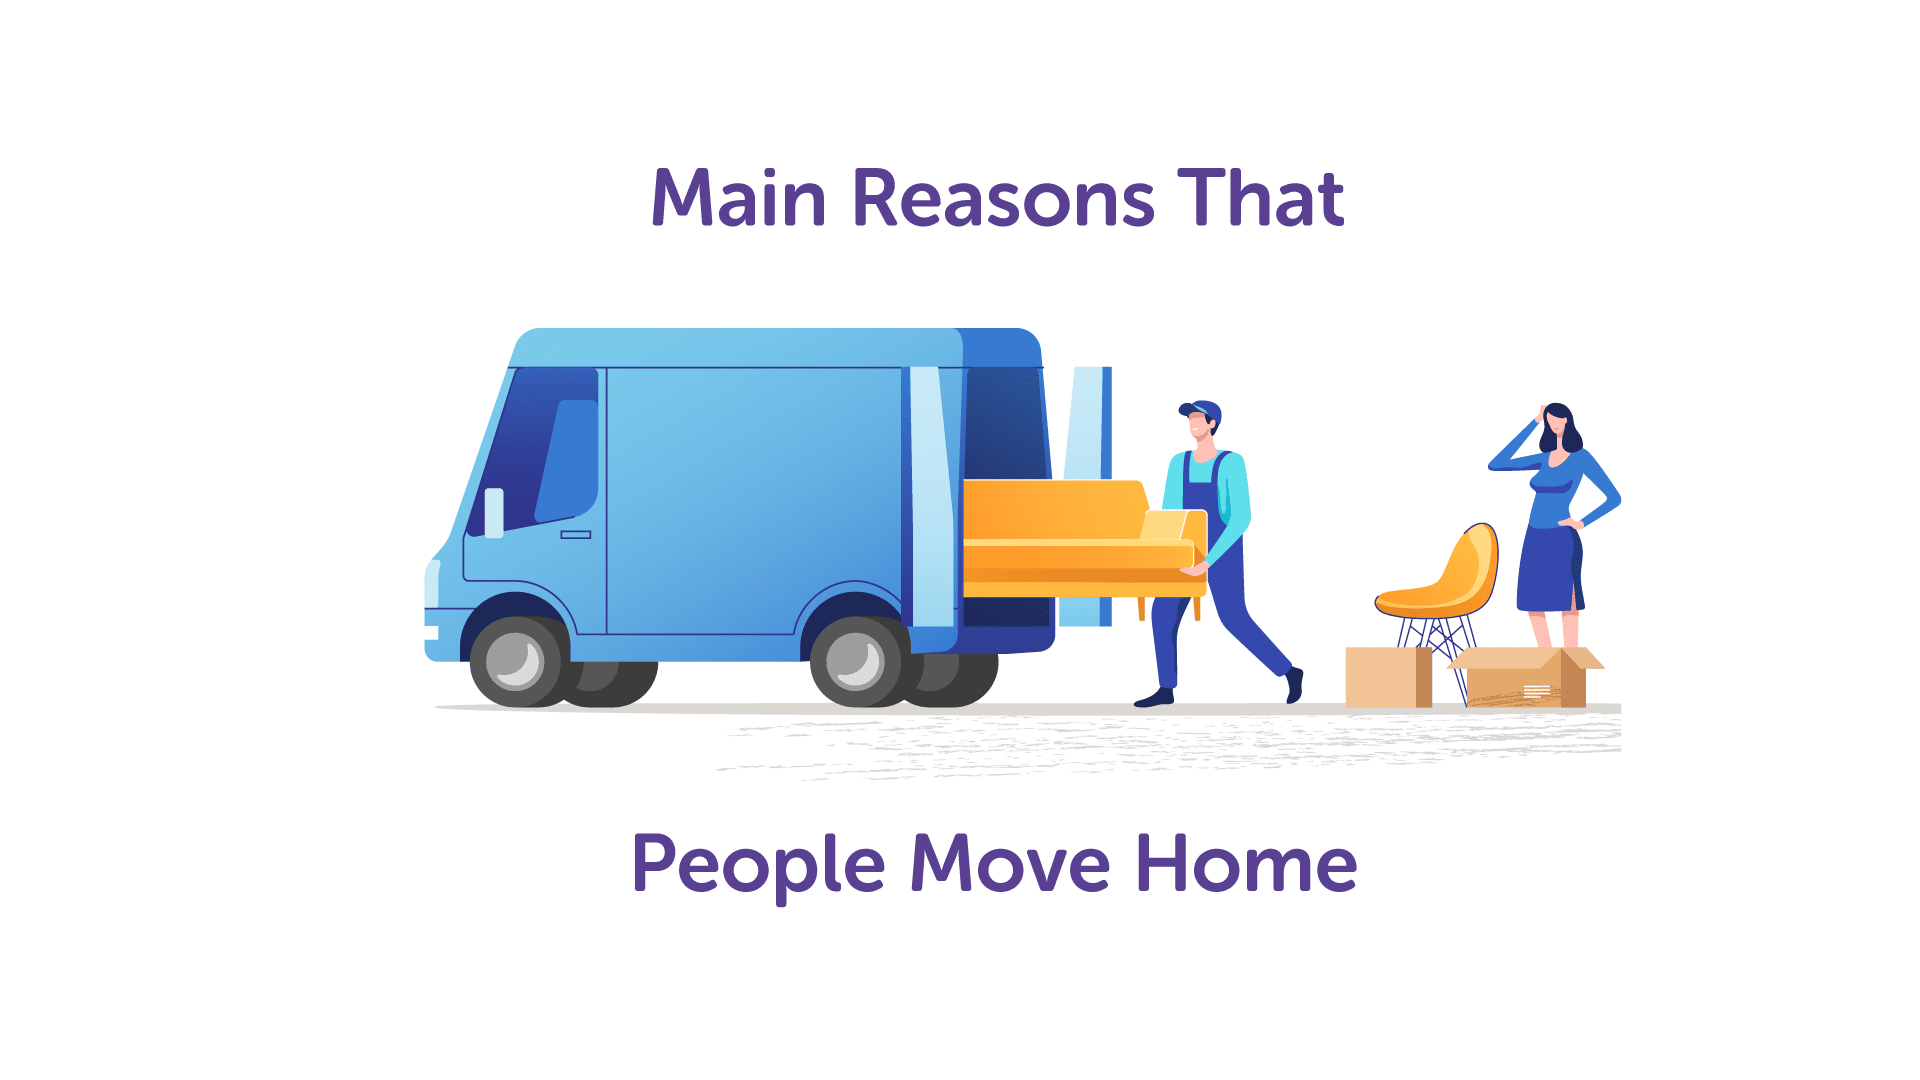 Main Reasons for Moving Home in Newcastle